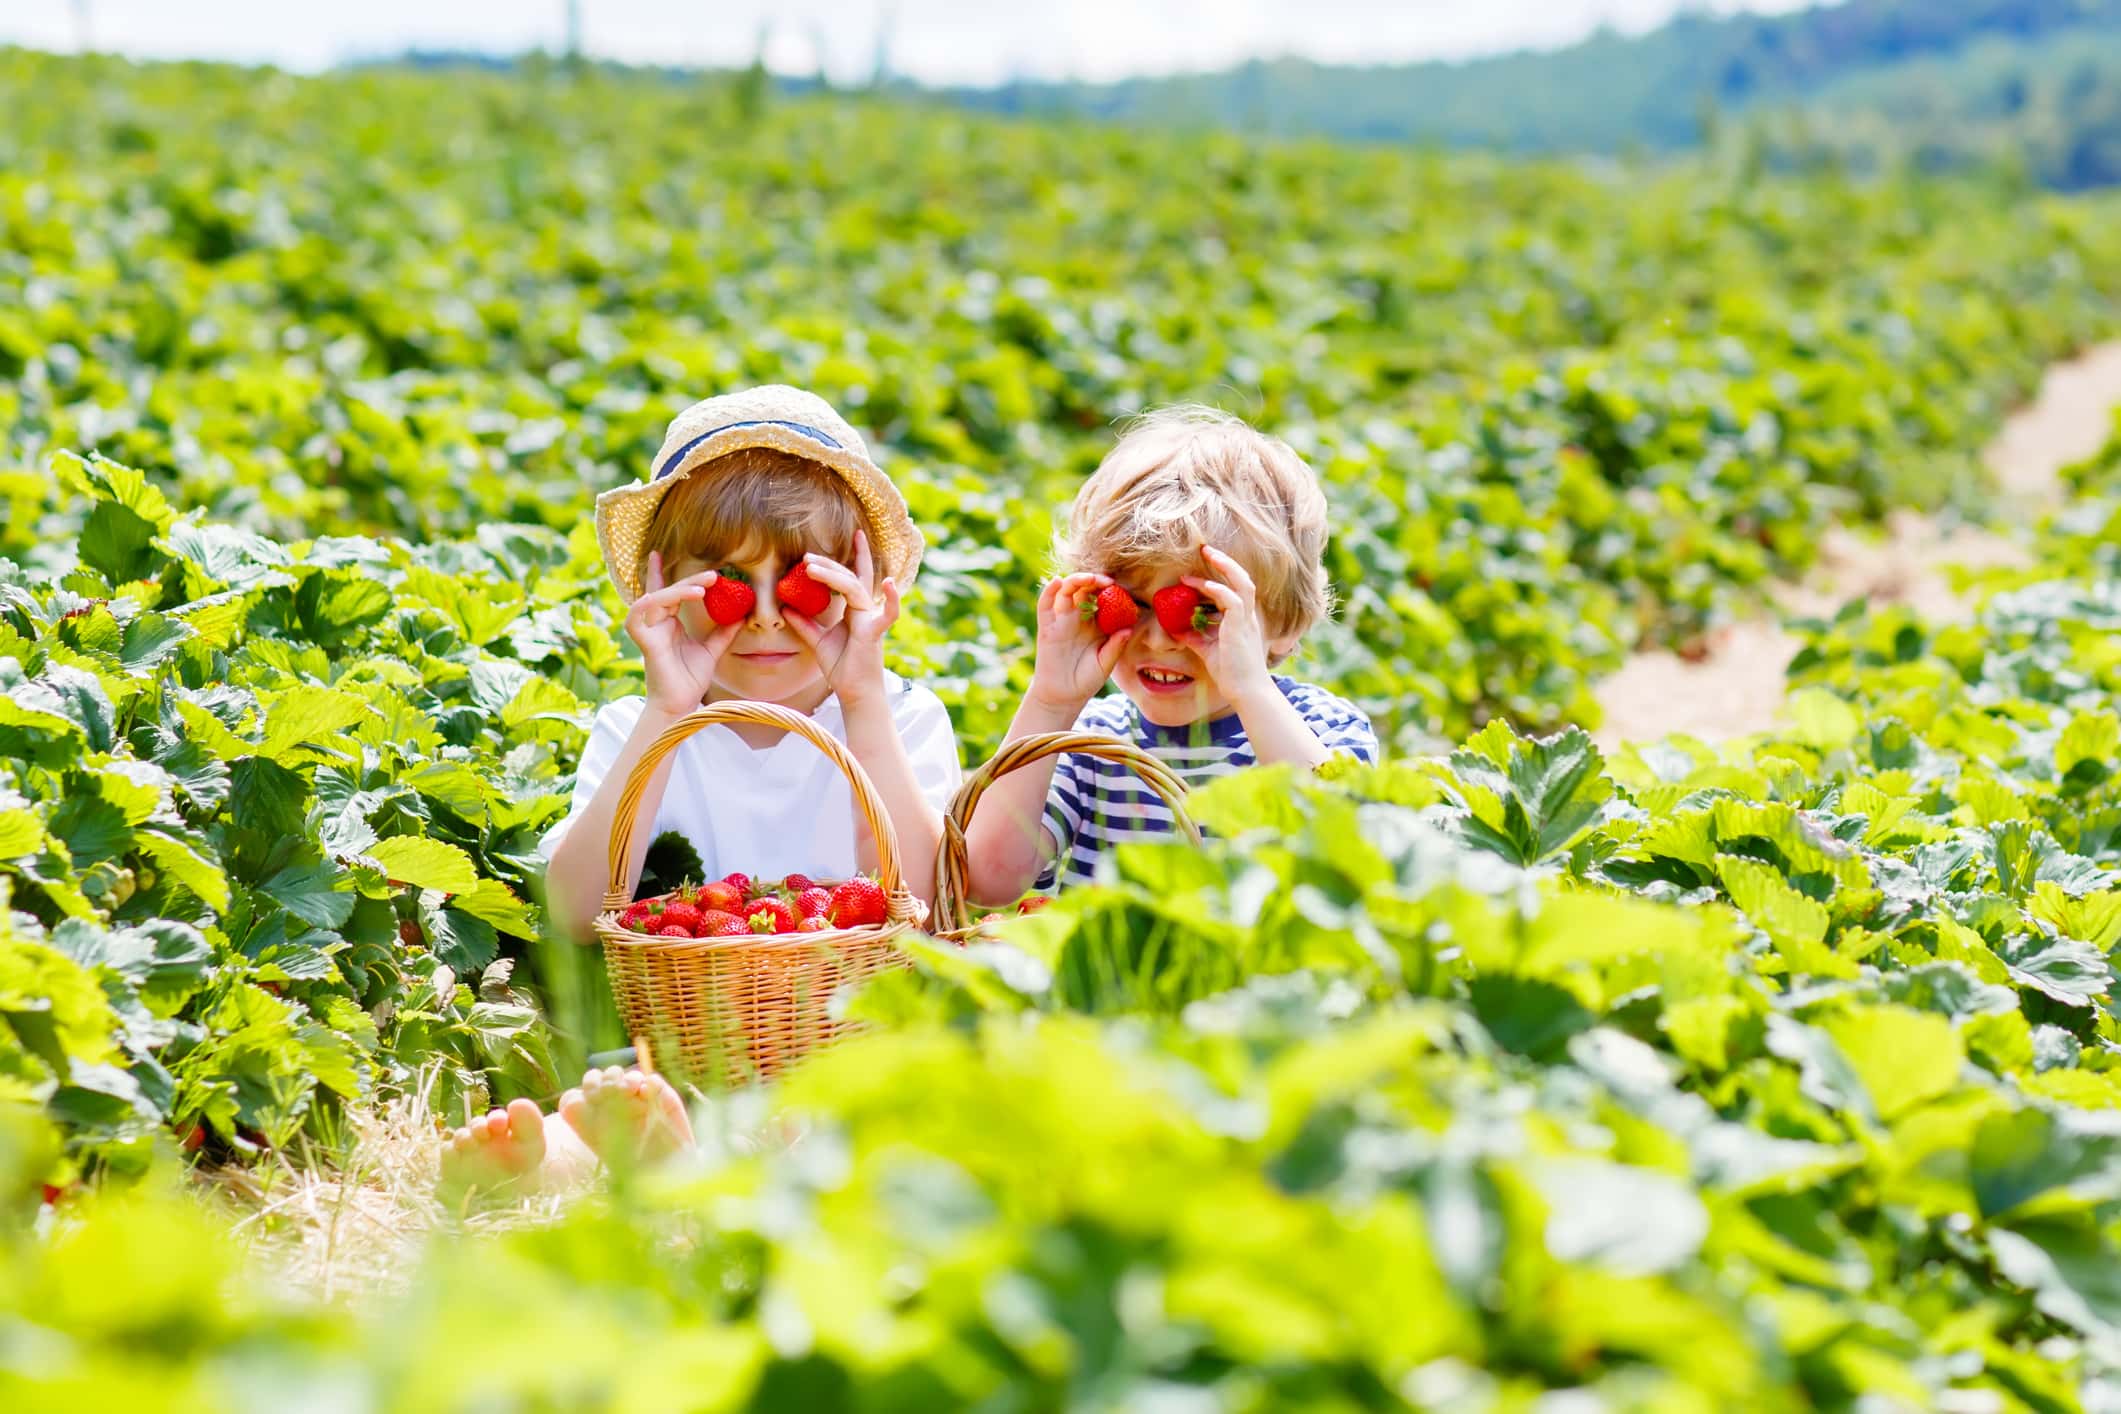 Two little sibling kids boys having fun on strawberry farm in summer. Children, cute twins eating healthy organic food, fresh berries as snack. Kids helping with harvest.